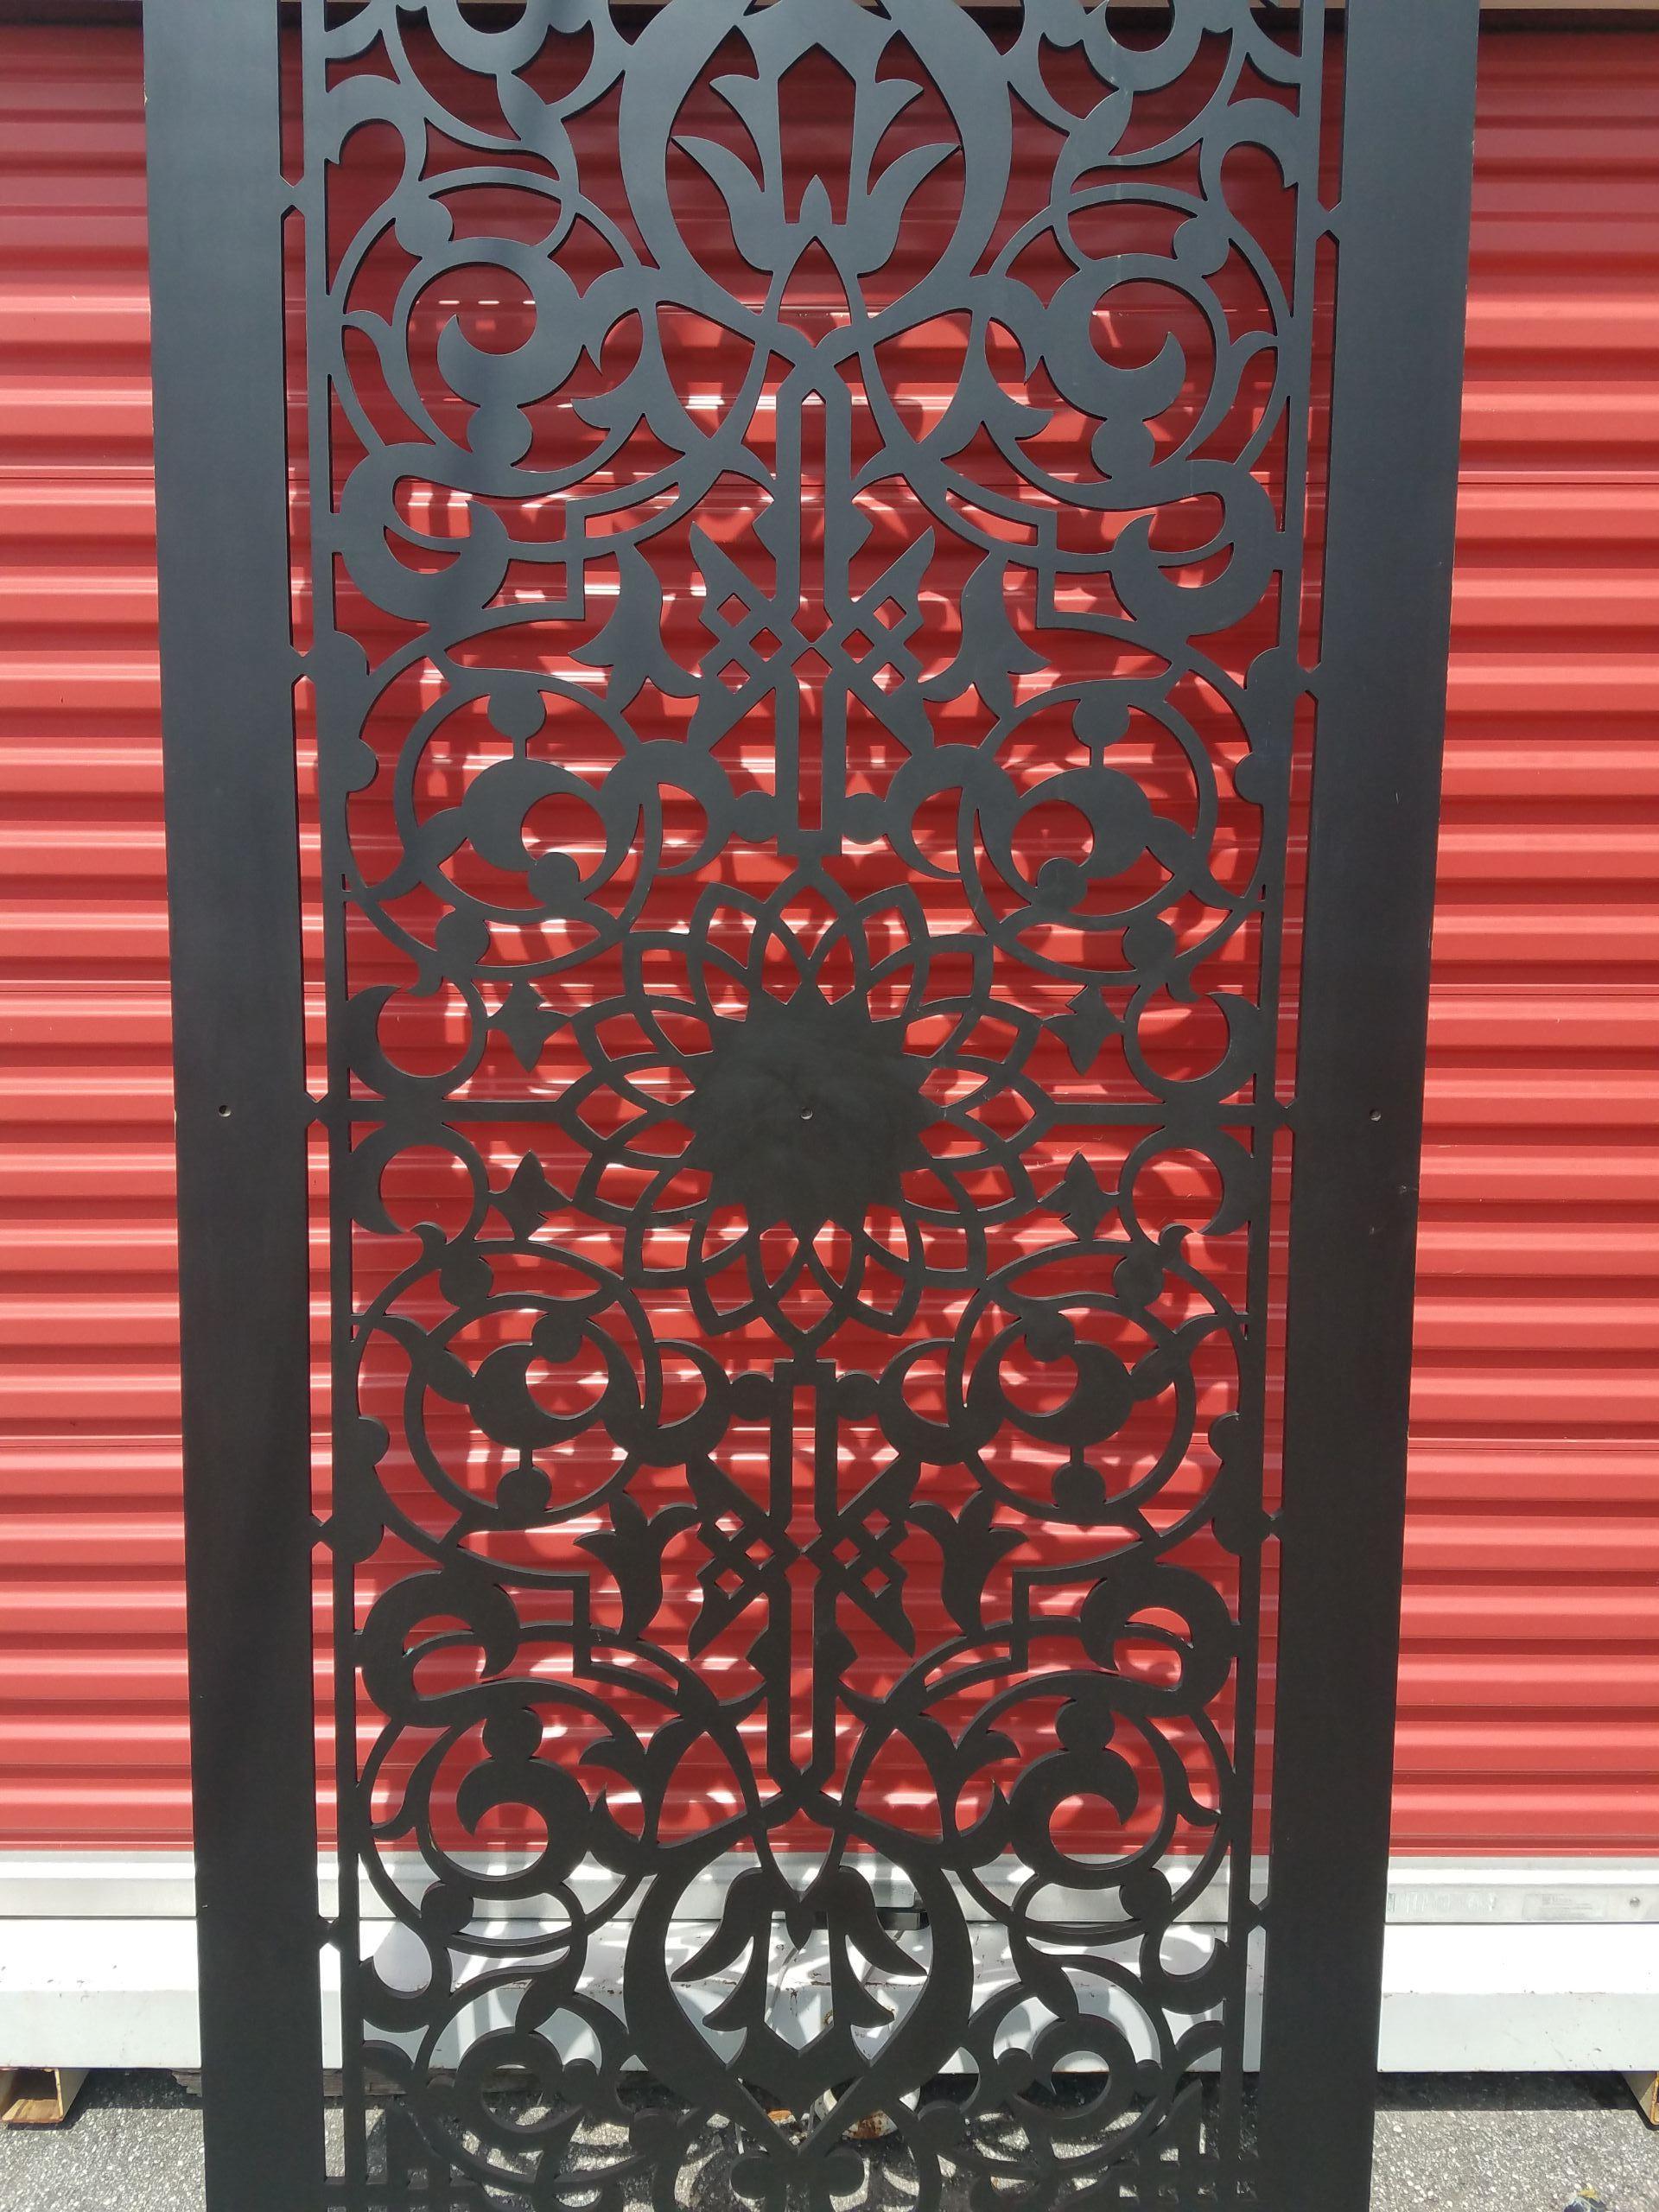 A well carved Moroccan wooden screen divider, featuring an intriguing yet intricate floral medallion design found among the best and most amazing artisans in southern Morocco. Rectangular shape. Color is dark brown. With its detailed carving